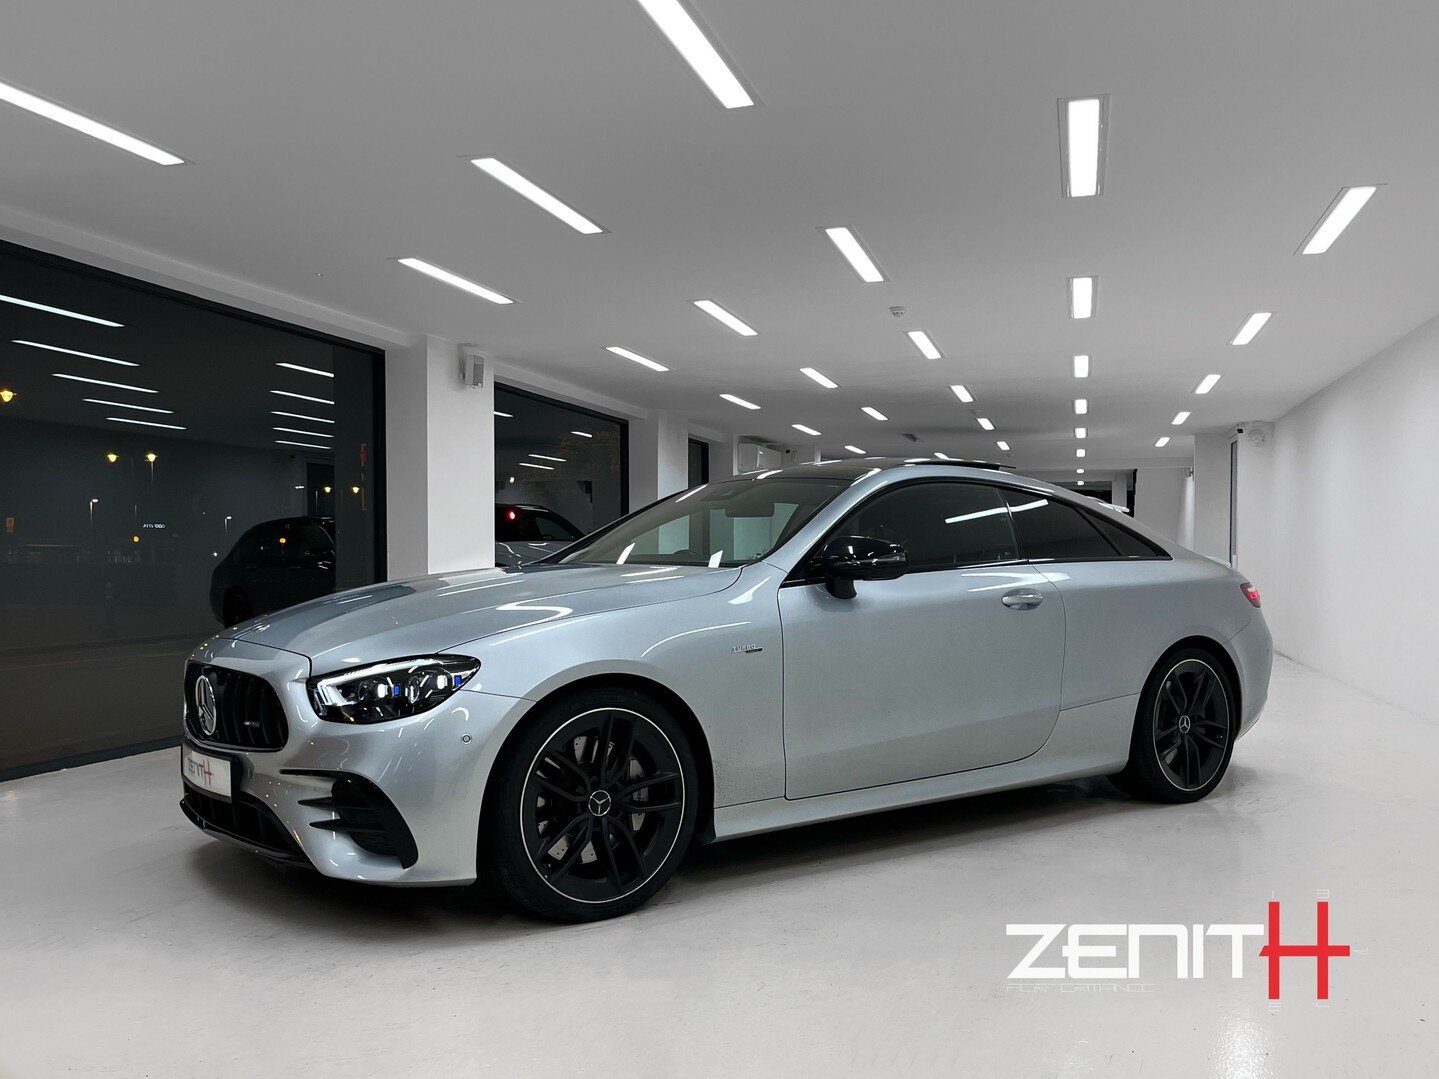 The E53 #AMG effortlessly combines performance and everyday practicality, making it the ultimate choice for daily driving. The 3.0-liter turbocharged engine gets things started and uses EQ Boost technology on demand to squeeze out 429 horsepower to a